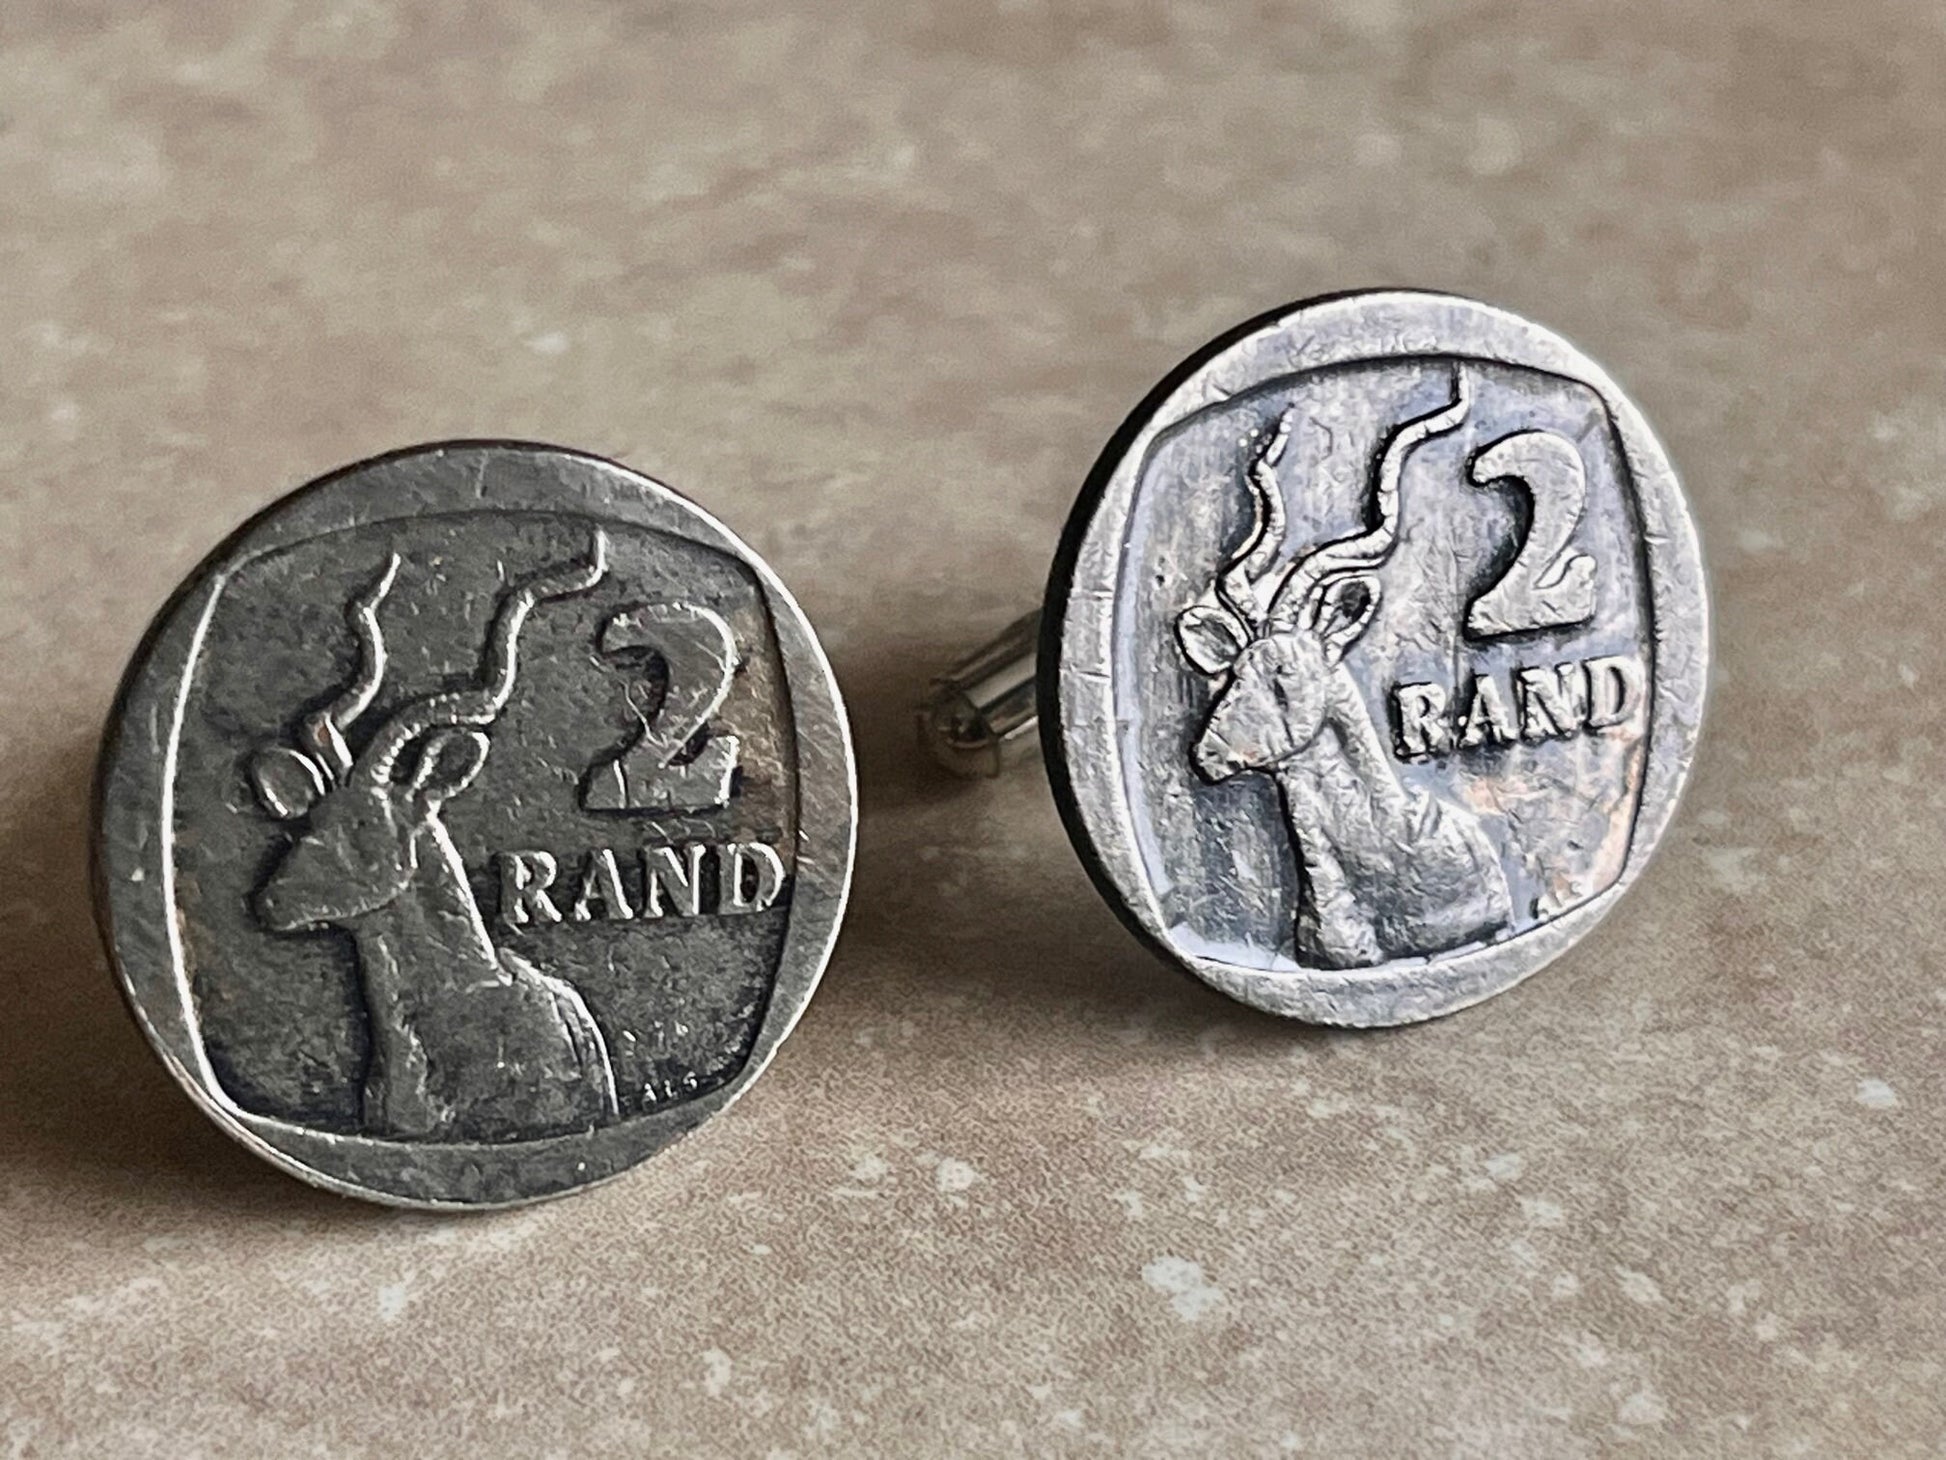 South Africa Coin Cuff Links Africa 2 Rand Personal Cufflinks Handmade Jewelry Gift Friend Charm For Him Her World Coin Collector